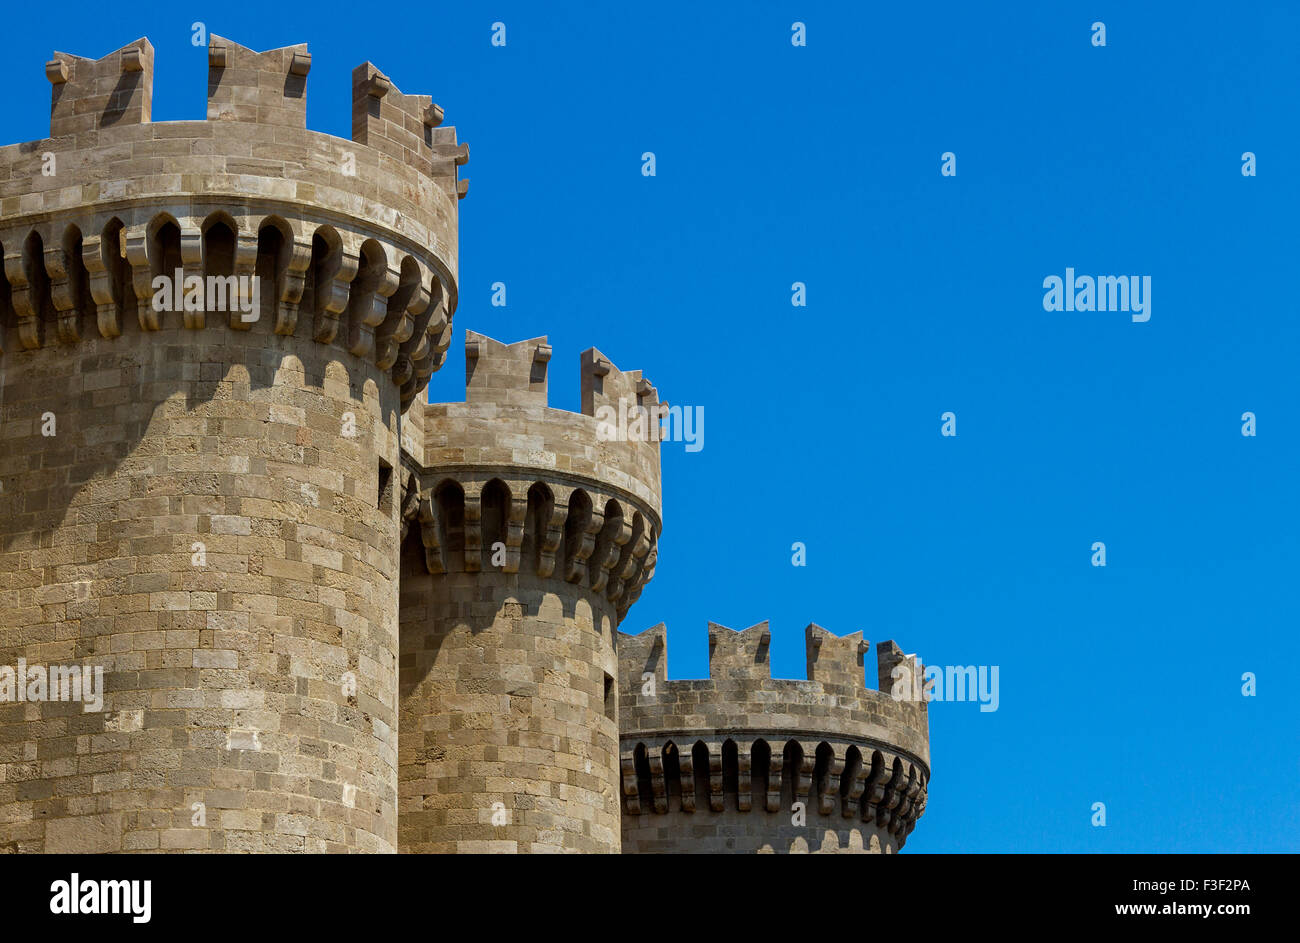 Towers of the Palace of Grand Master, in the Old Town of Rhodes, in Greece. Stock Photo